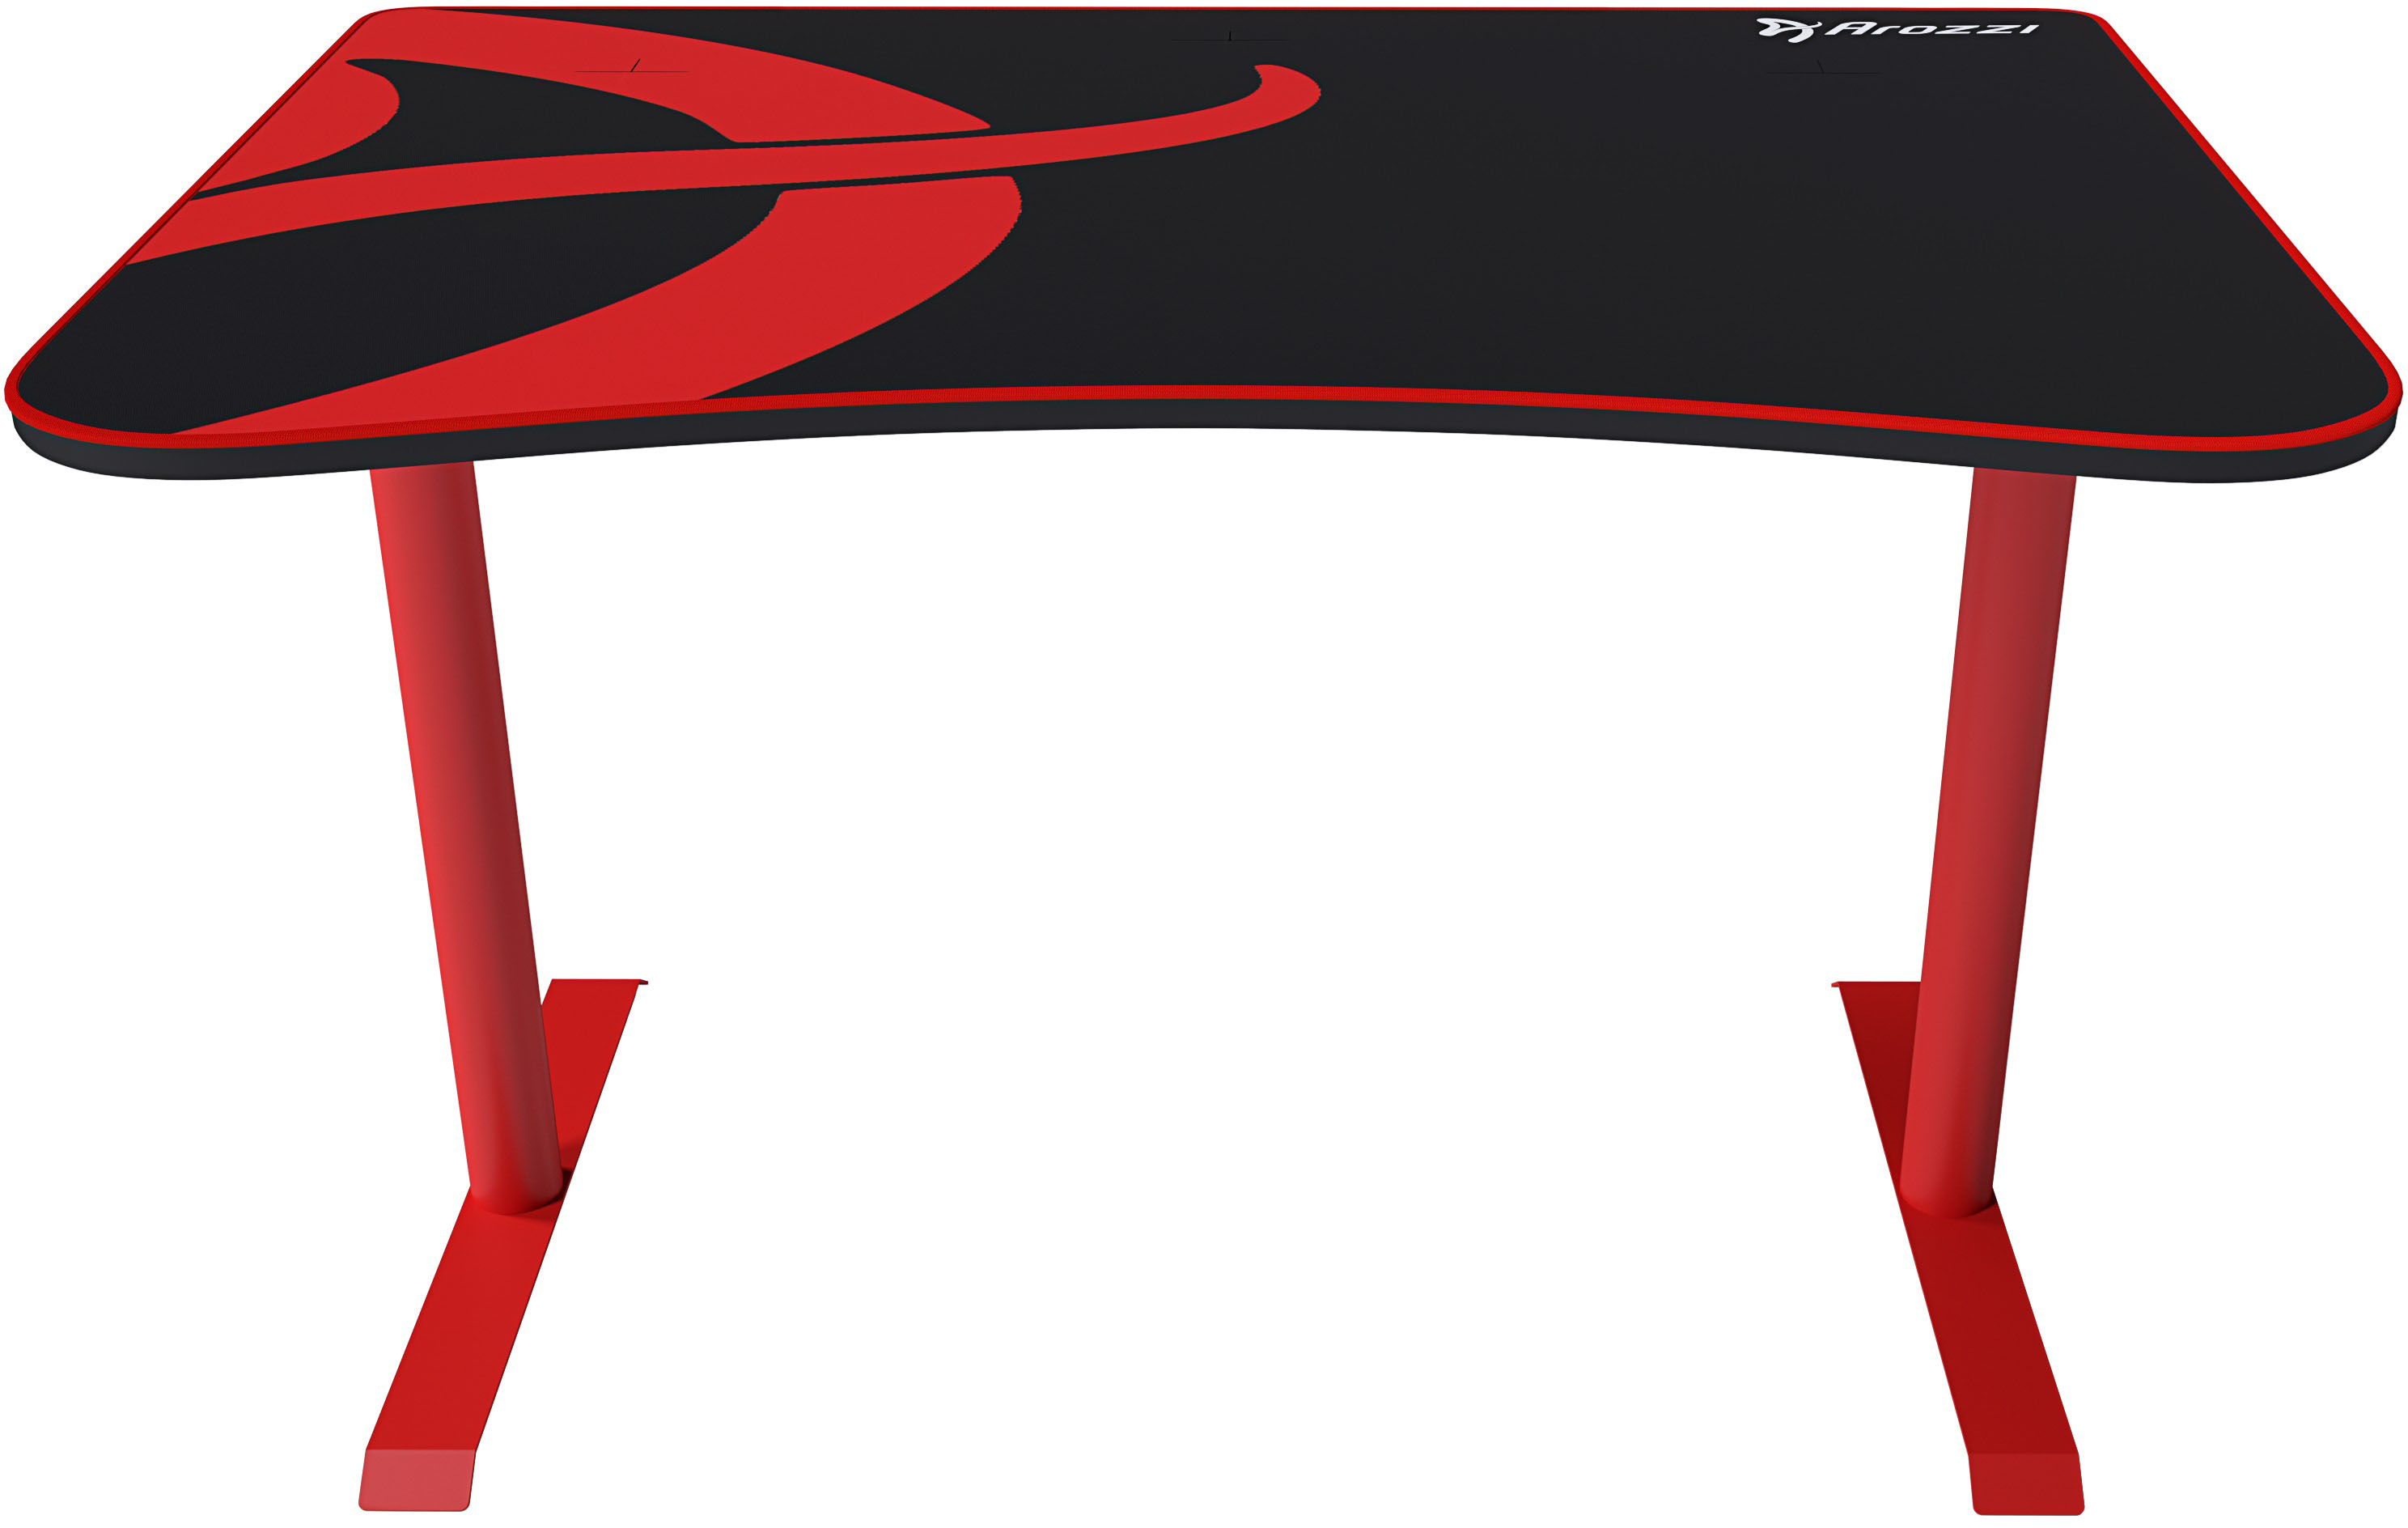 Angle View: Arozzi - Arena Fratello Gaming Desk - Red